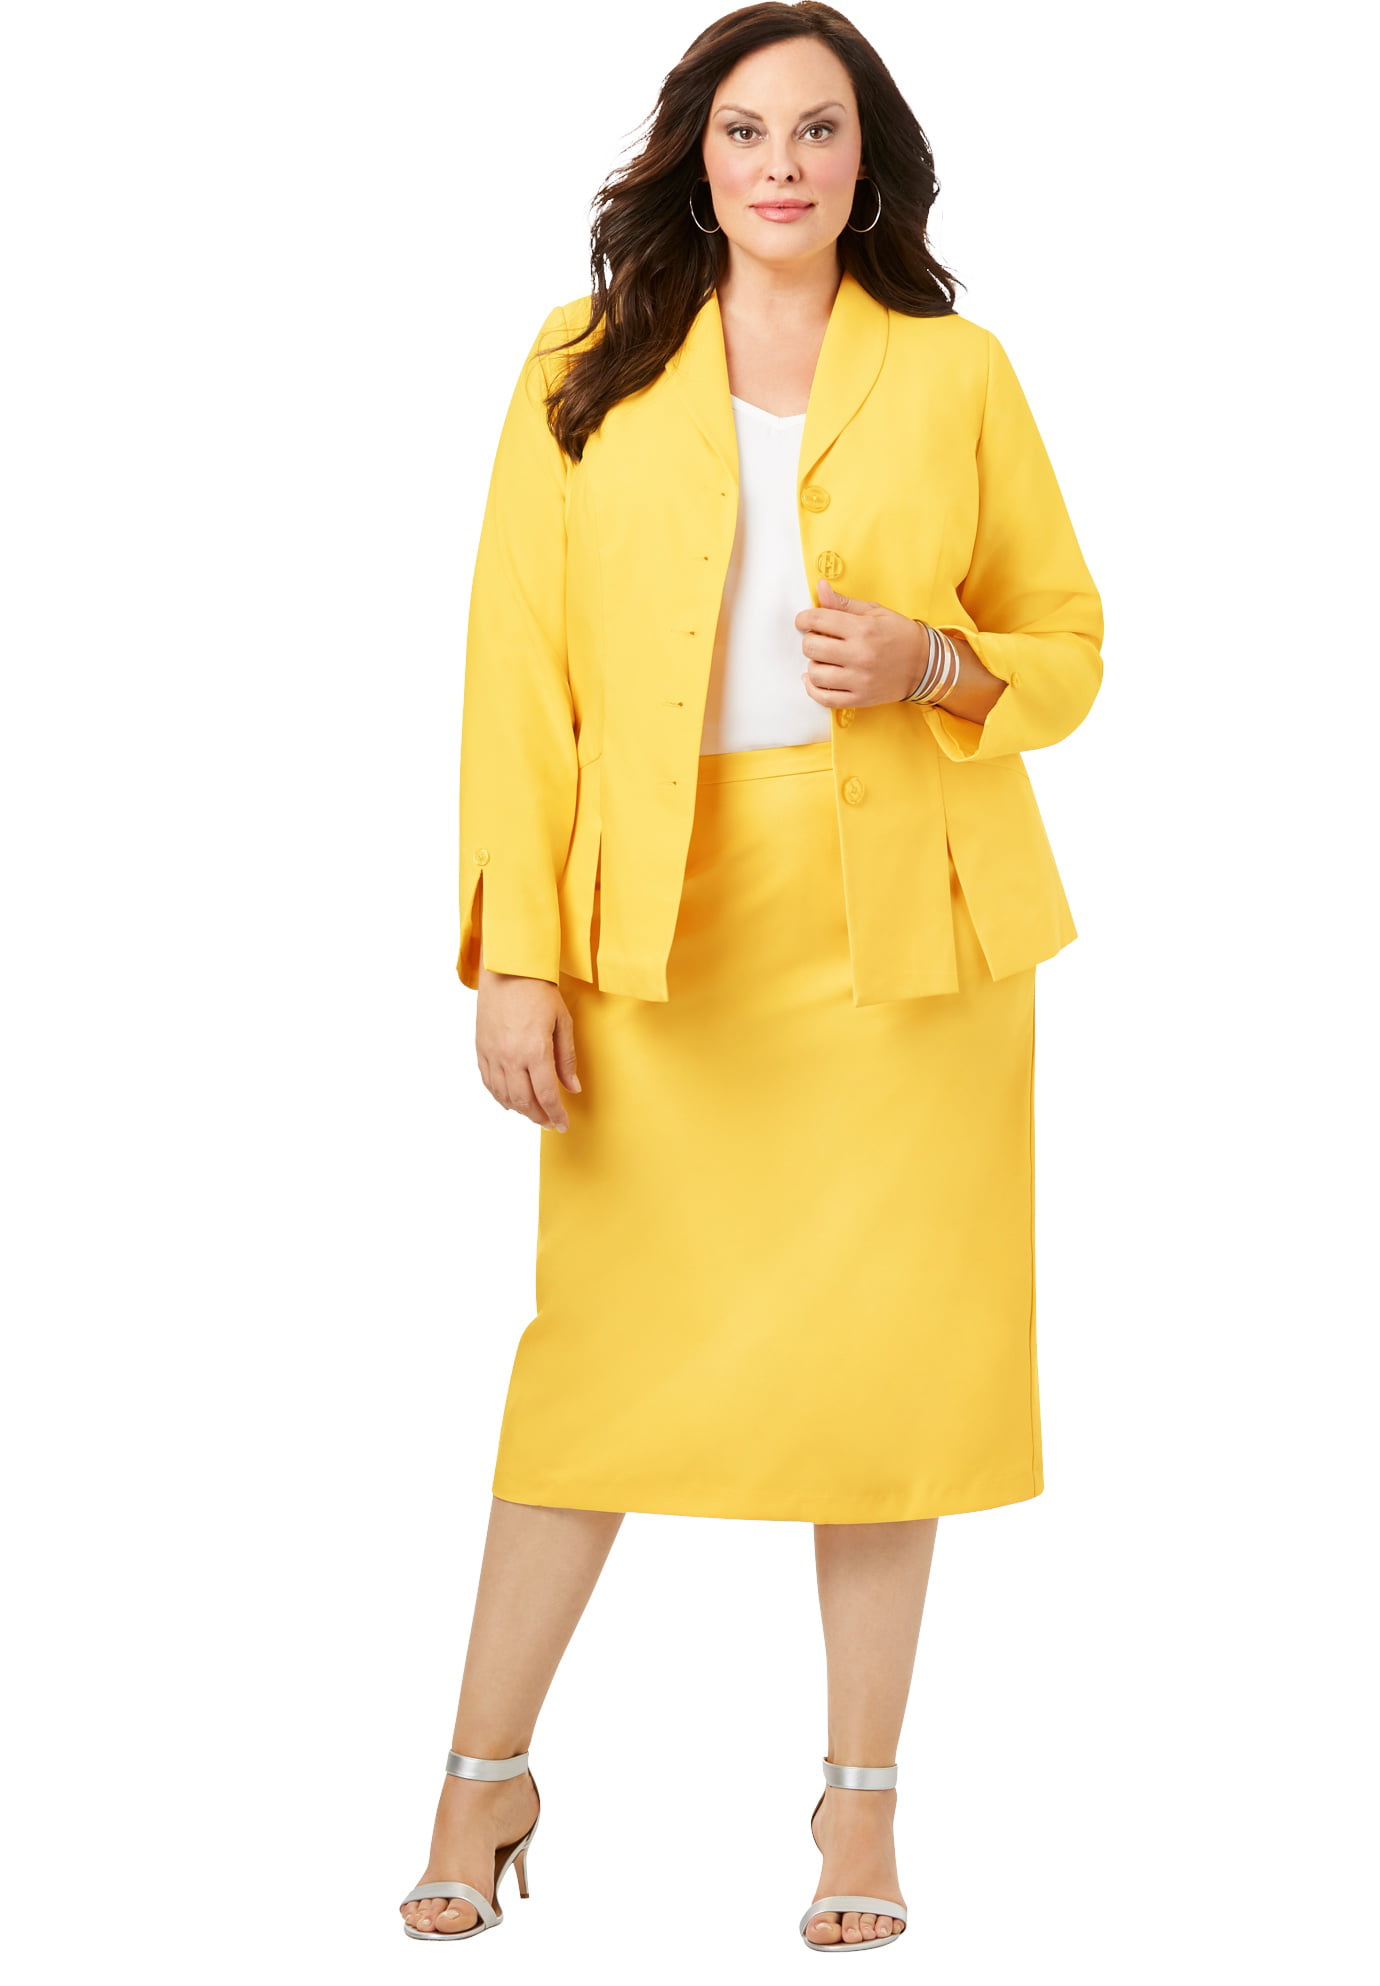 Roamans Womens Plus Size Two-Piece Skirt Suit with Shawl-Collar Jacket 